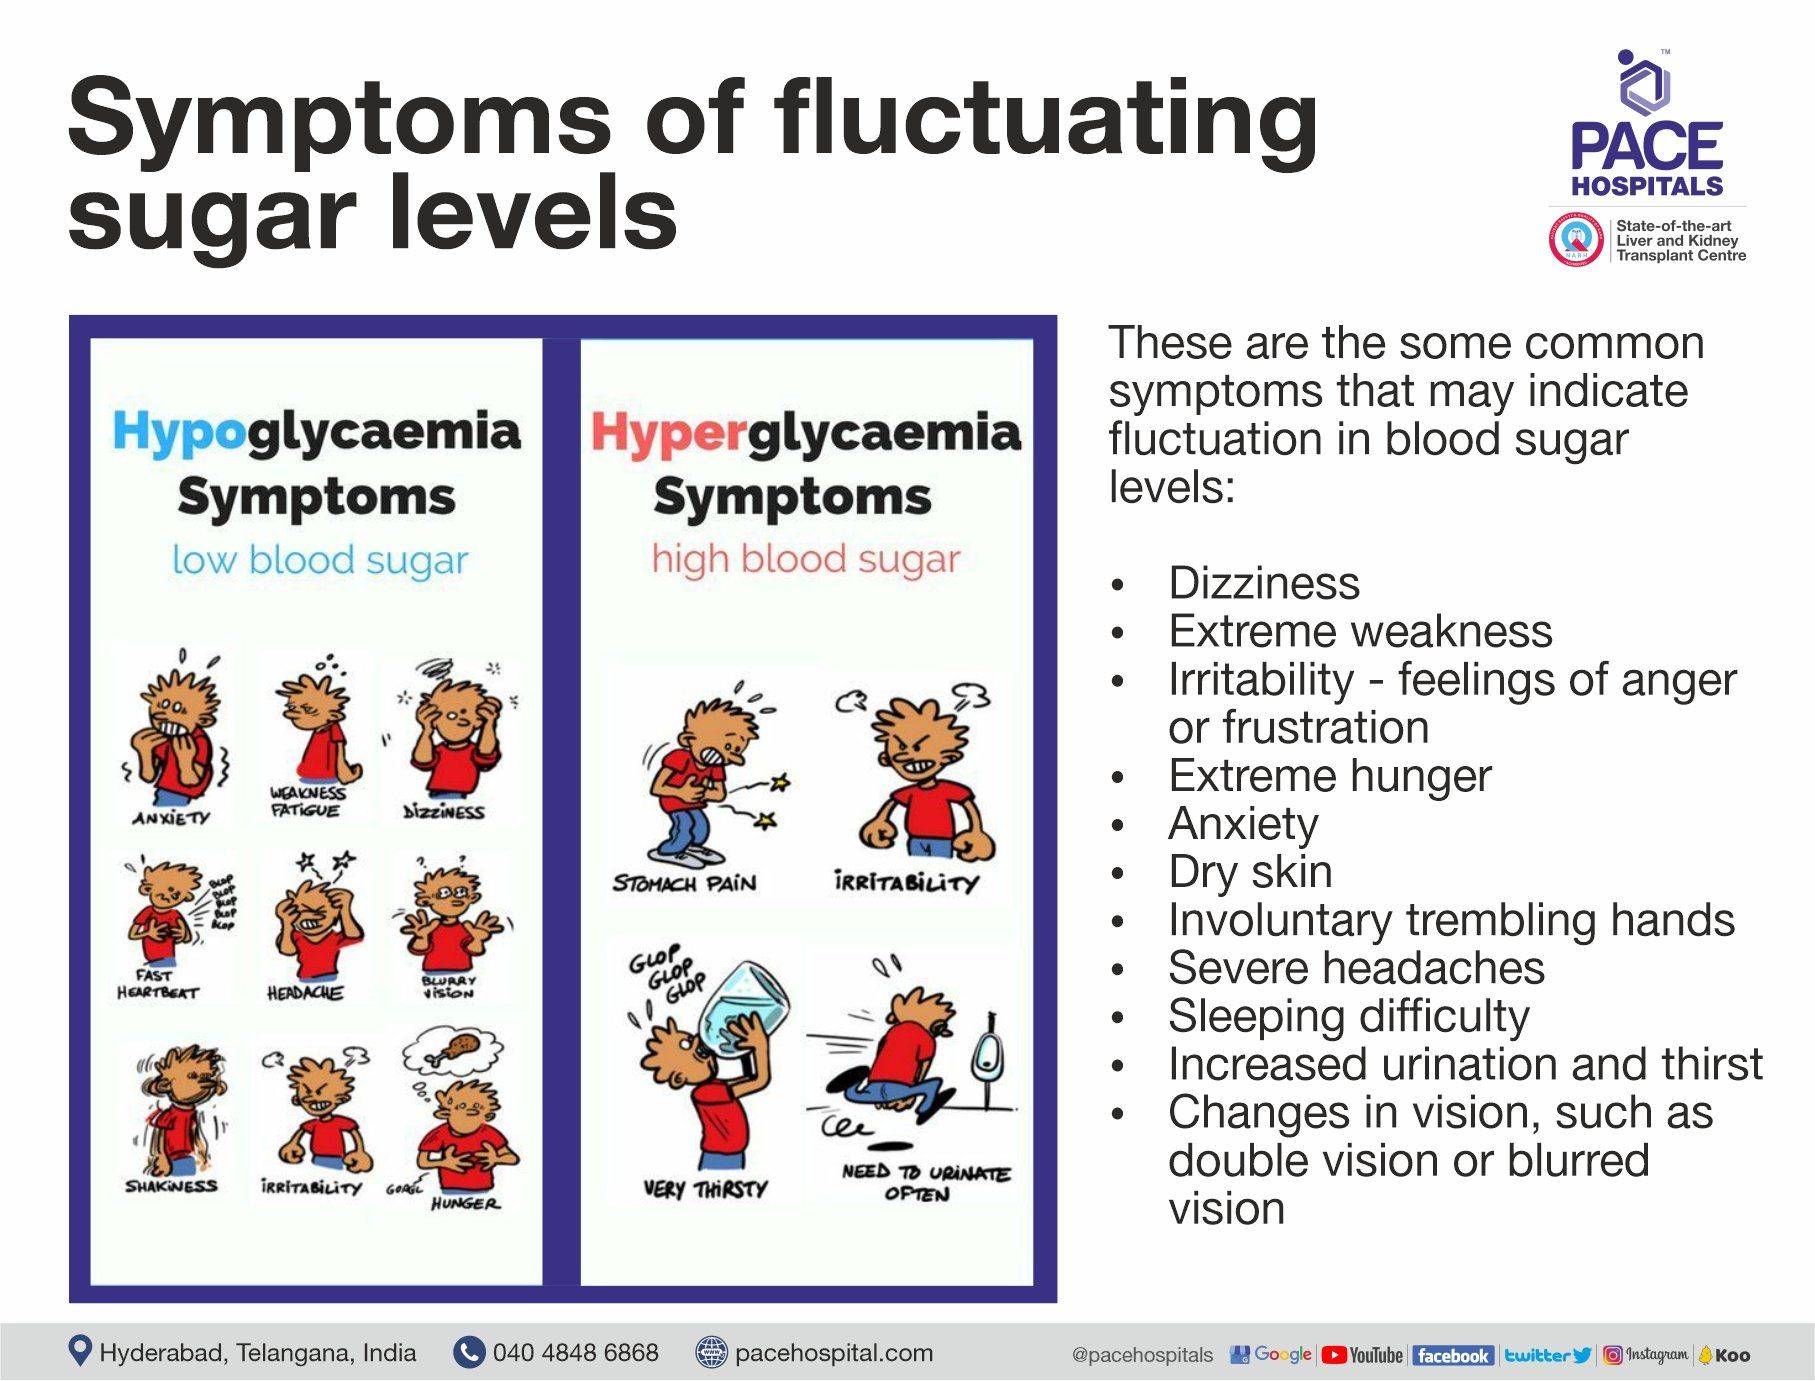 Symptoms of fluctuating blood sugar levels